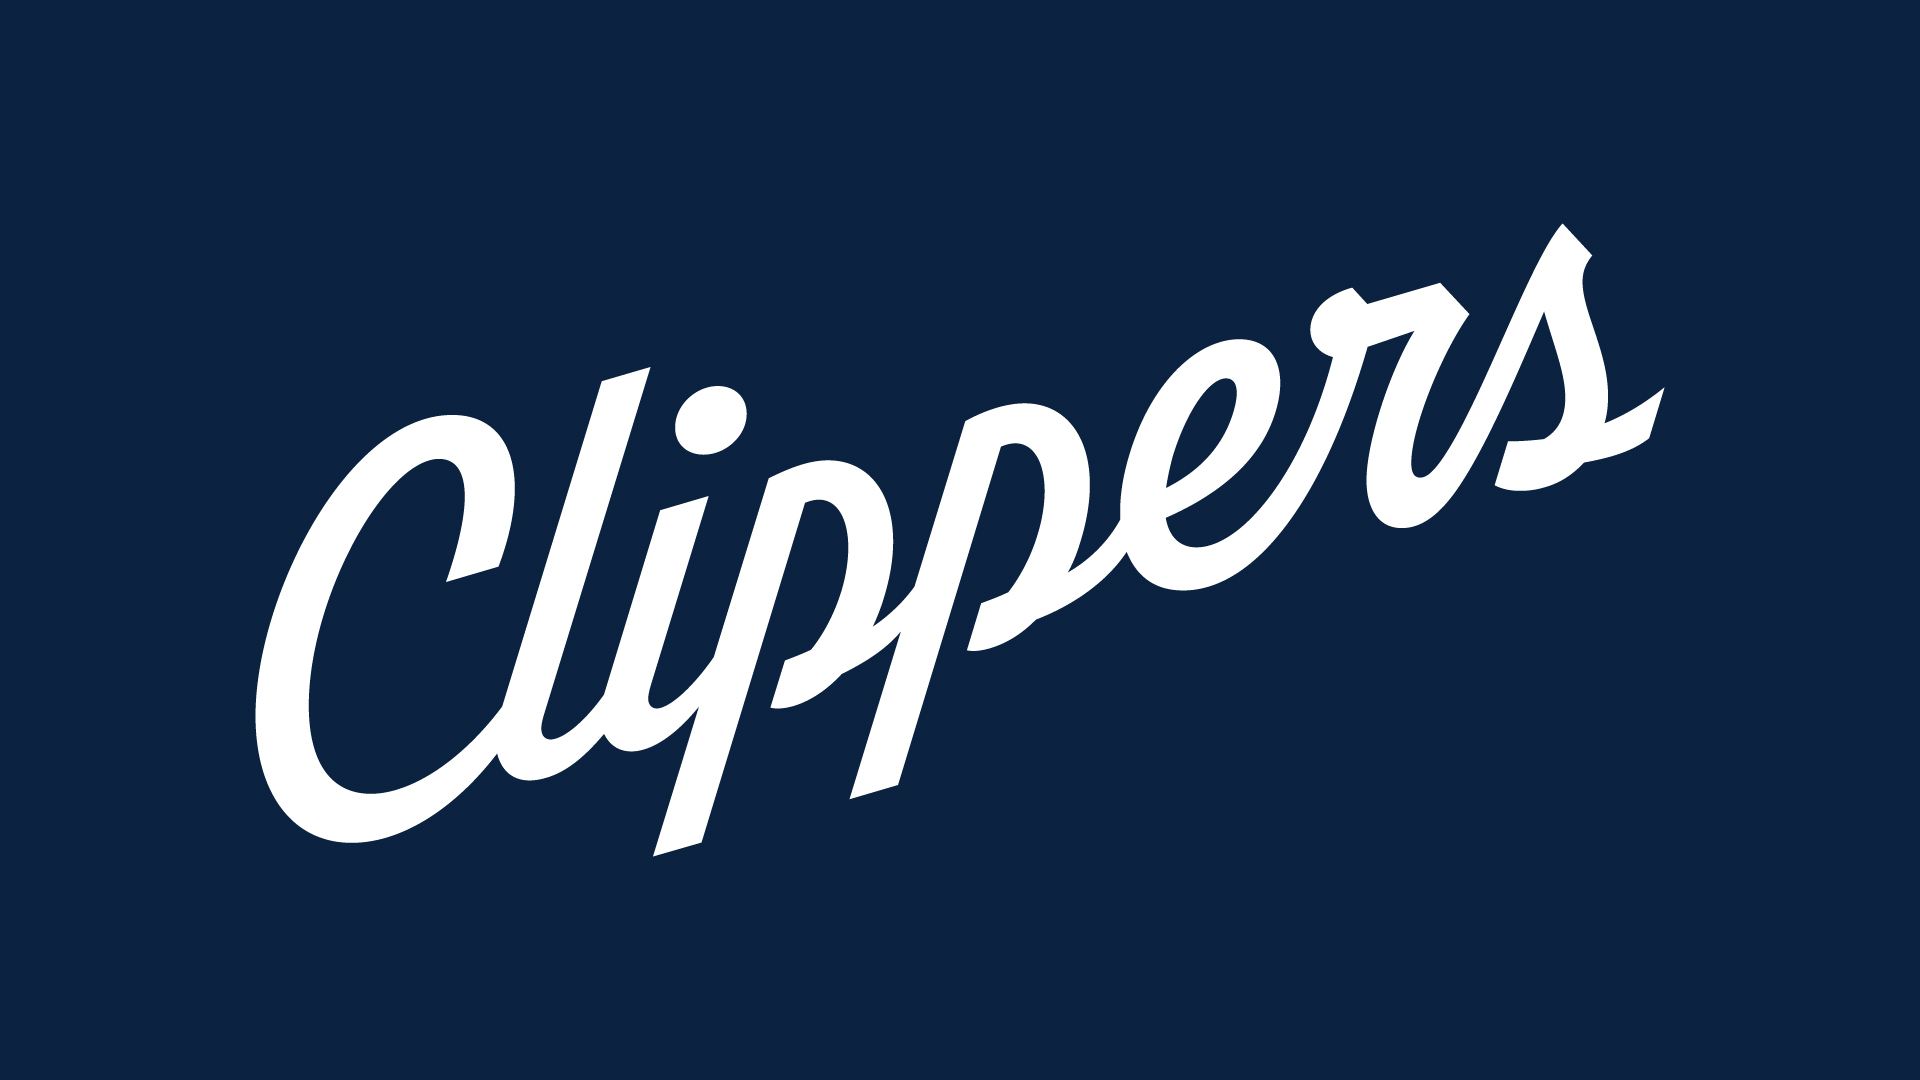 LAClippersTypography_Clippers_Navy_MatthewWolff